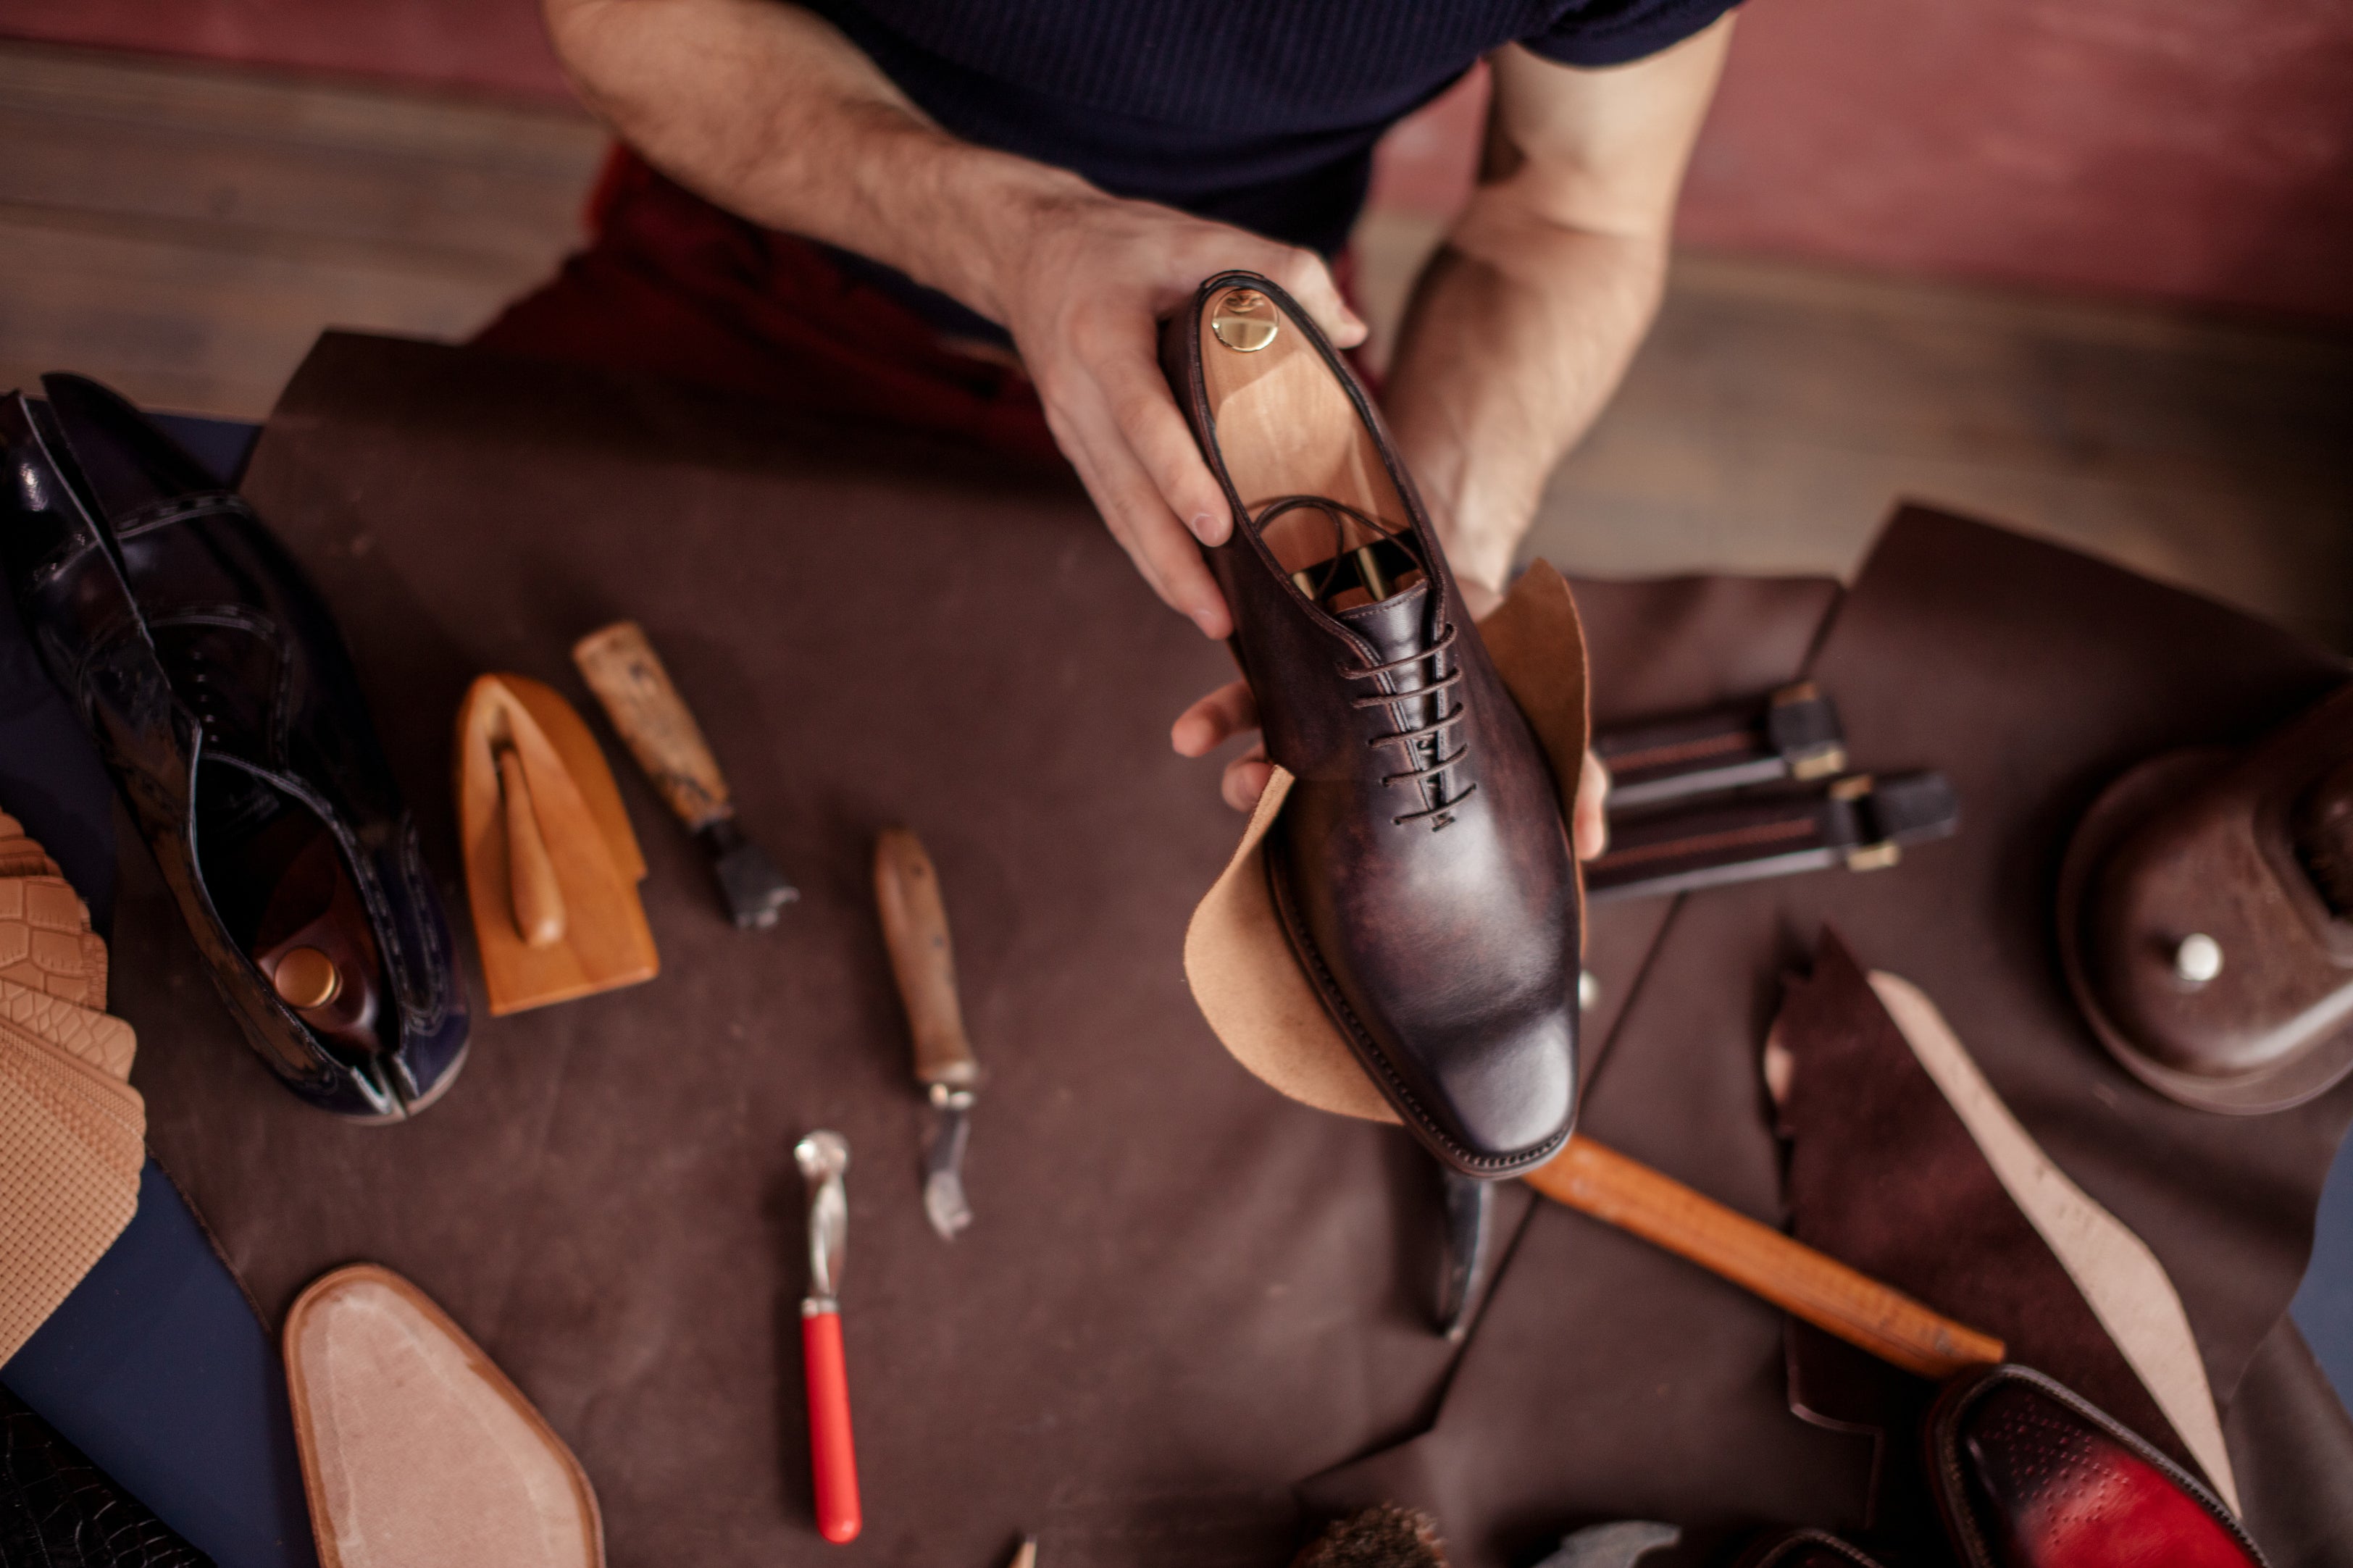 Expert Tips for Finding the Best Men's Dress Shoes